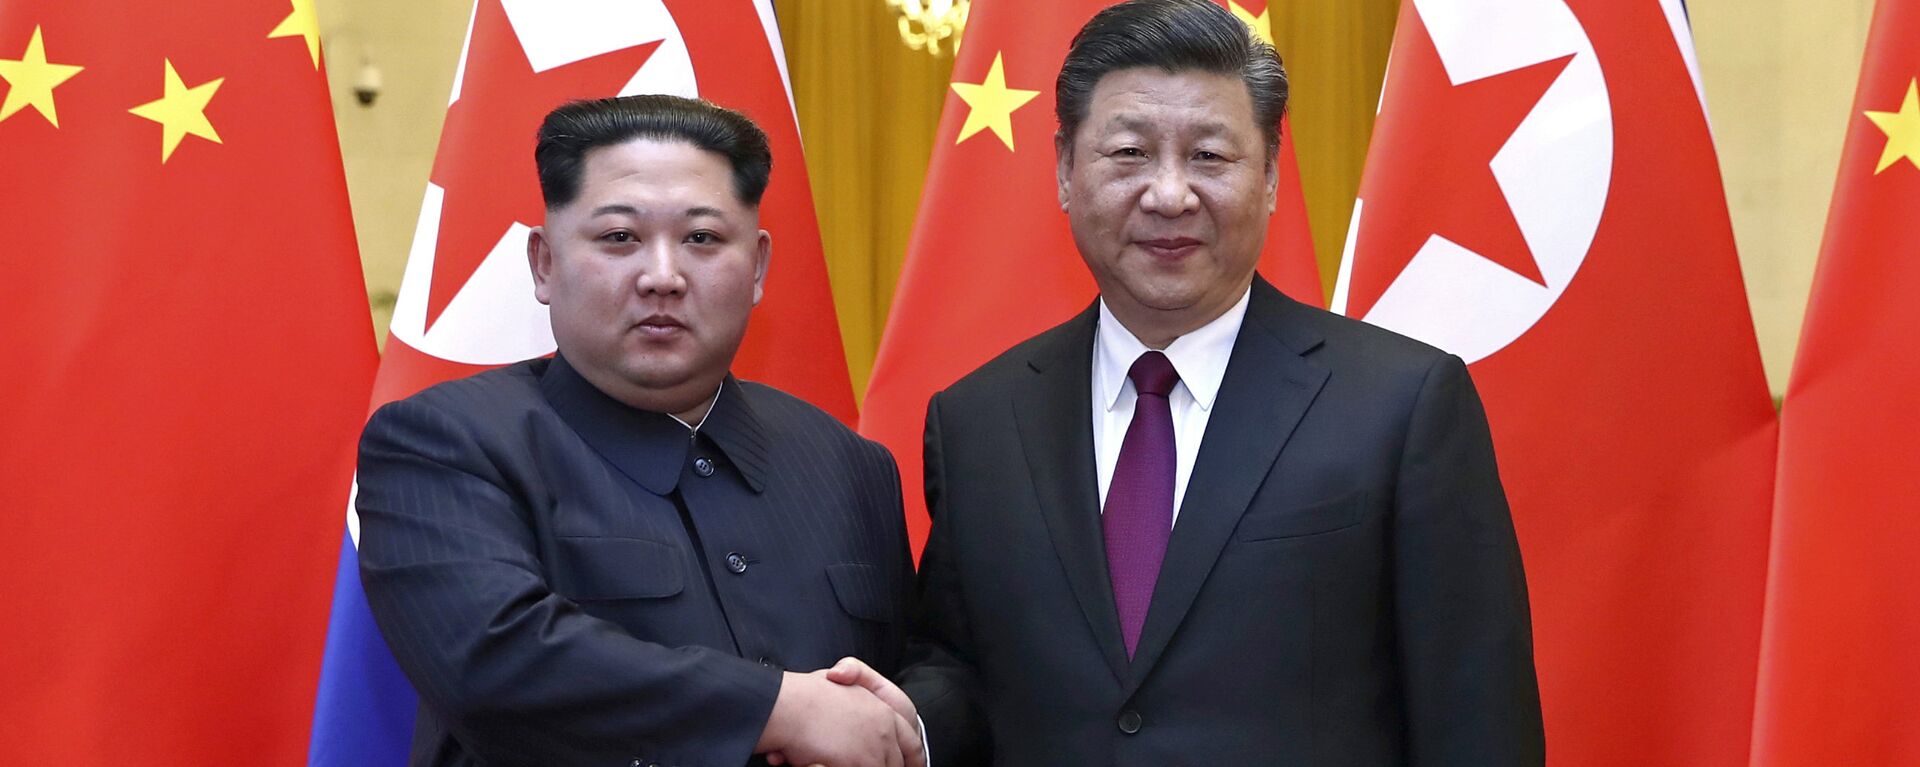 In this photo provided Wednesday, March 28, 2018, by China's Xinhua News Agency, North Korean leader Kim Jong Un, left, and Chinese President Xi Jinping shake hands in Beijing, China.  - Sputnik International, 1920, 23.10.2022